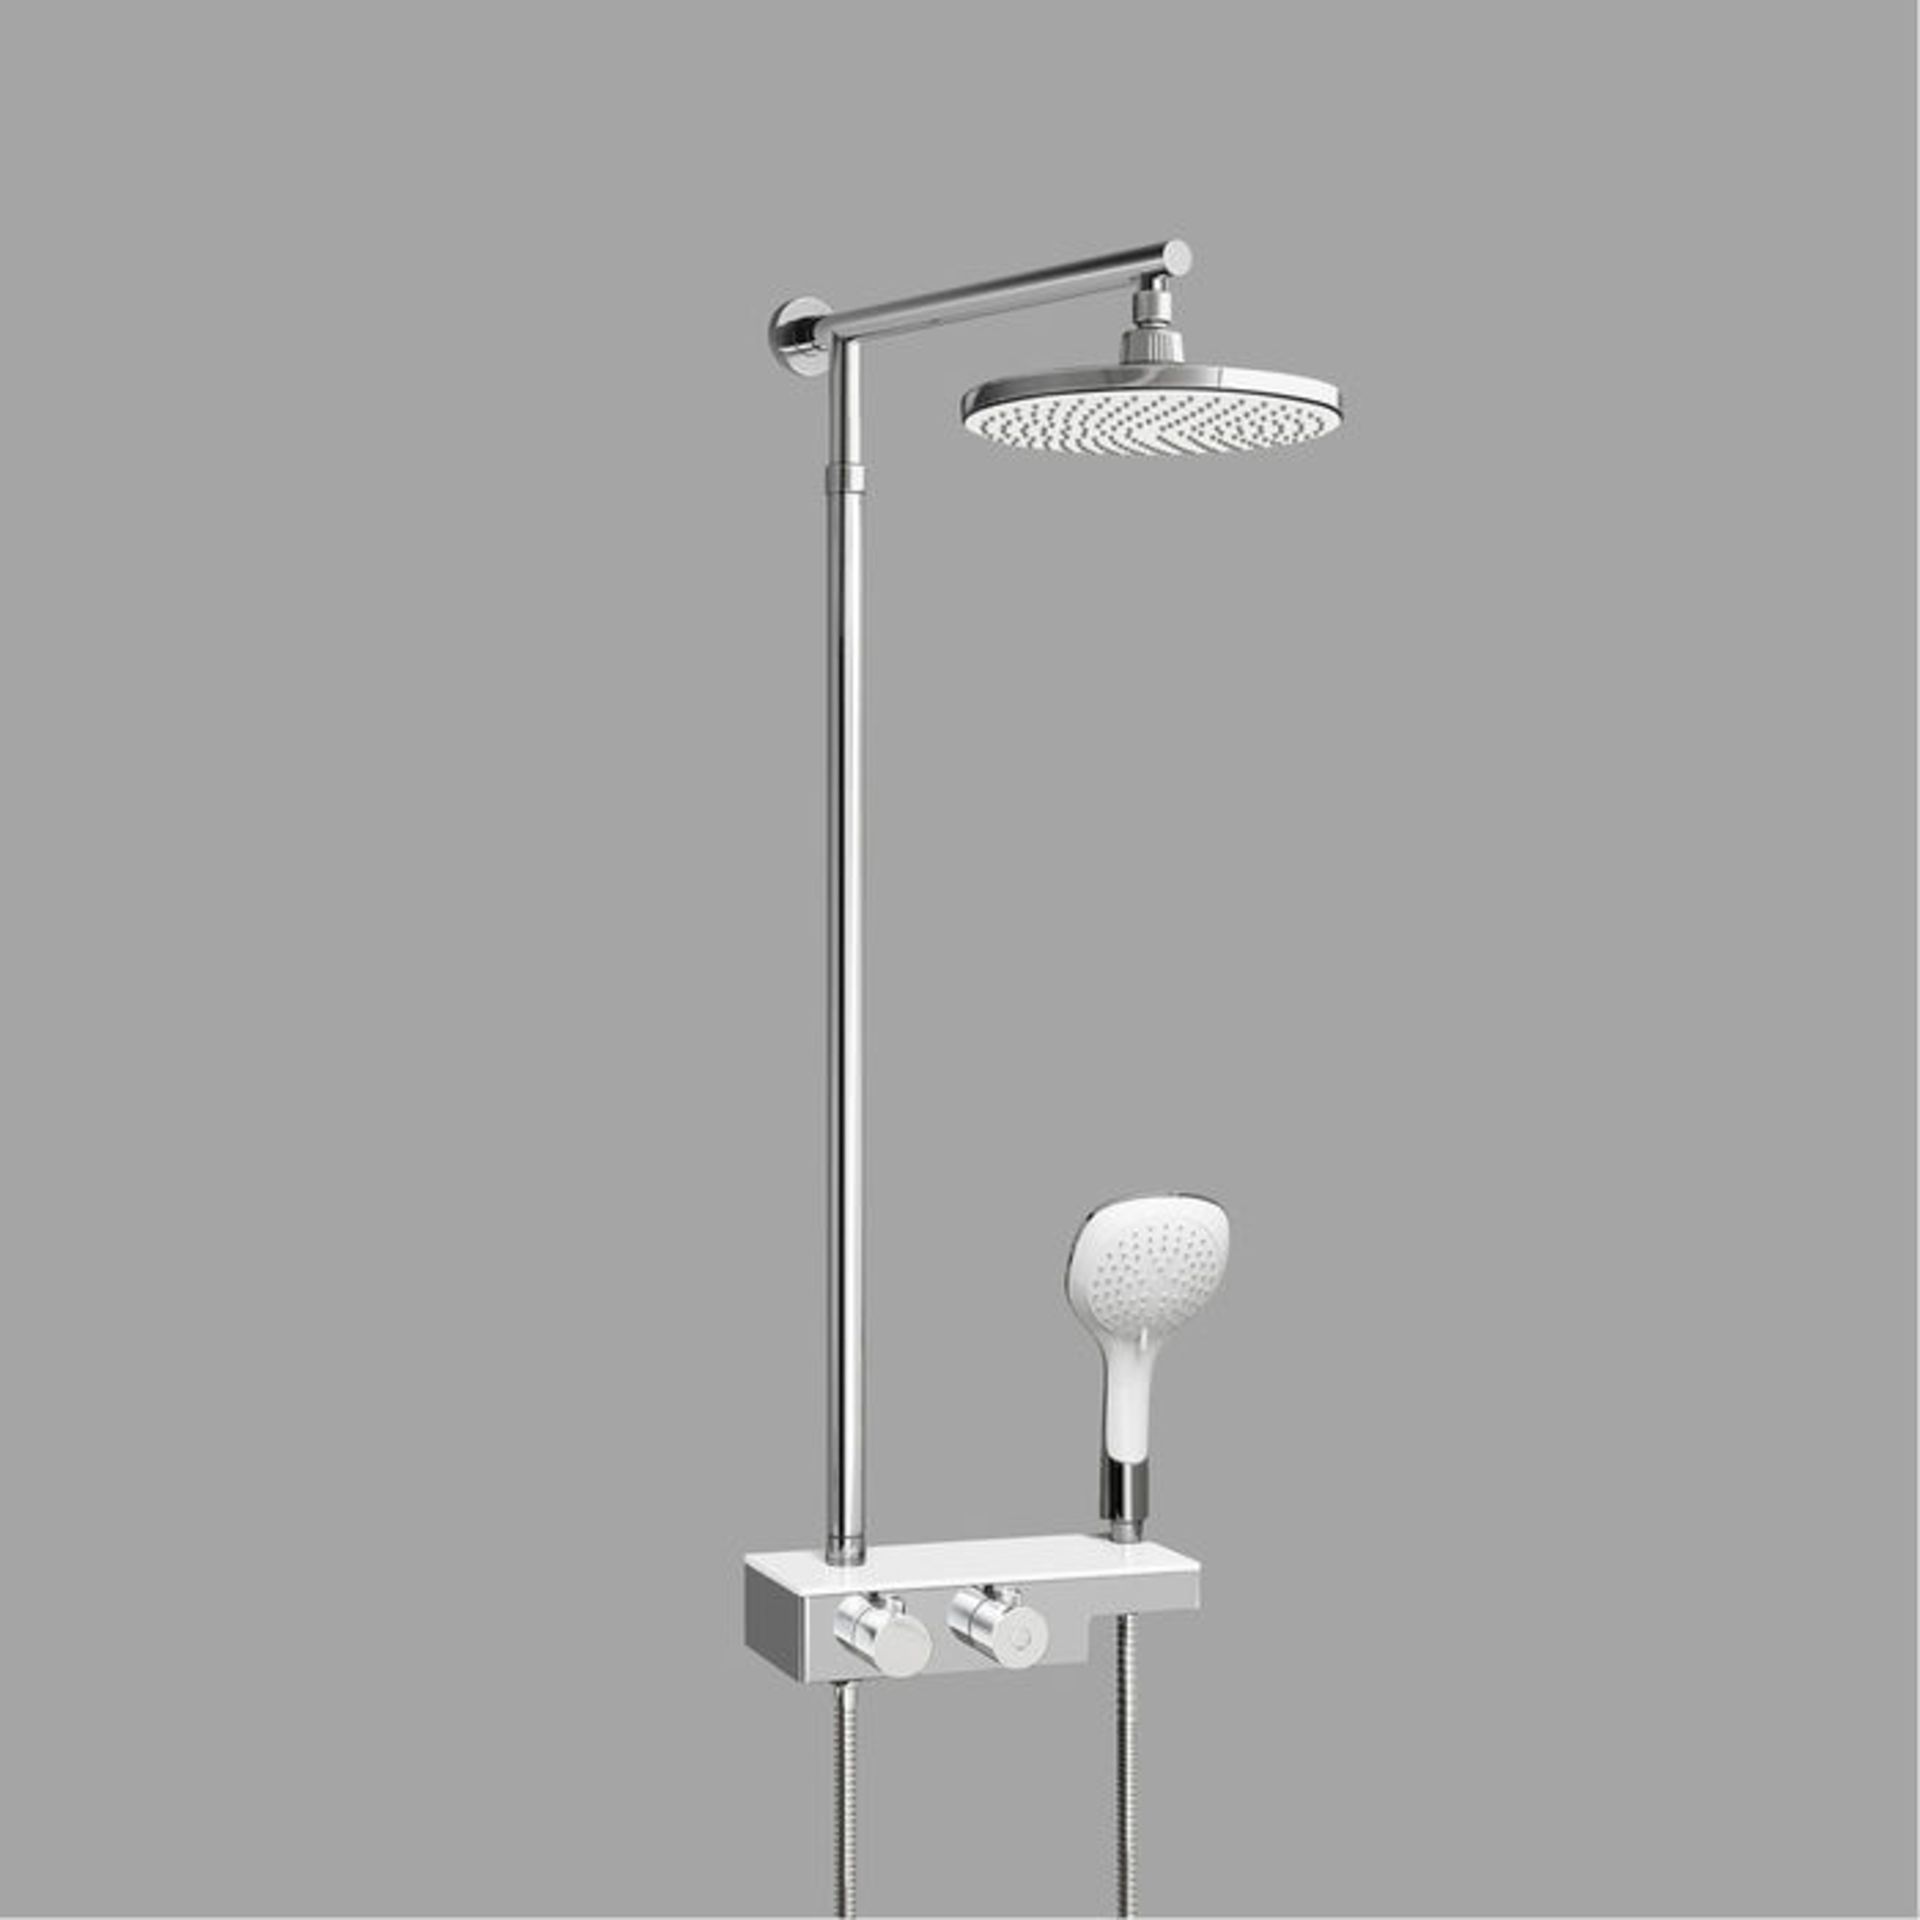 (S42)Round Exposed Thermostatic Mixer Shower Kit Medium Head & Shelf. Cool to touch shower for - Image 5 of 5